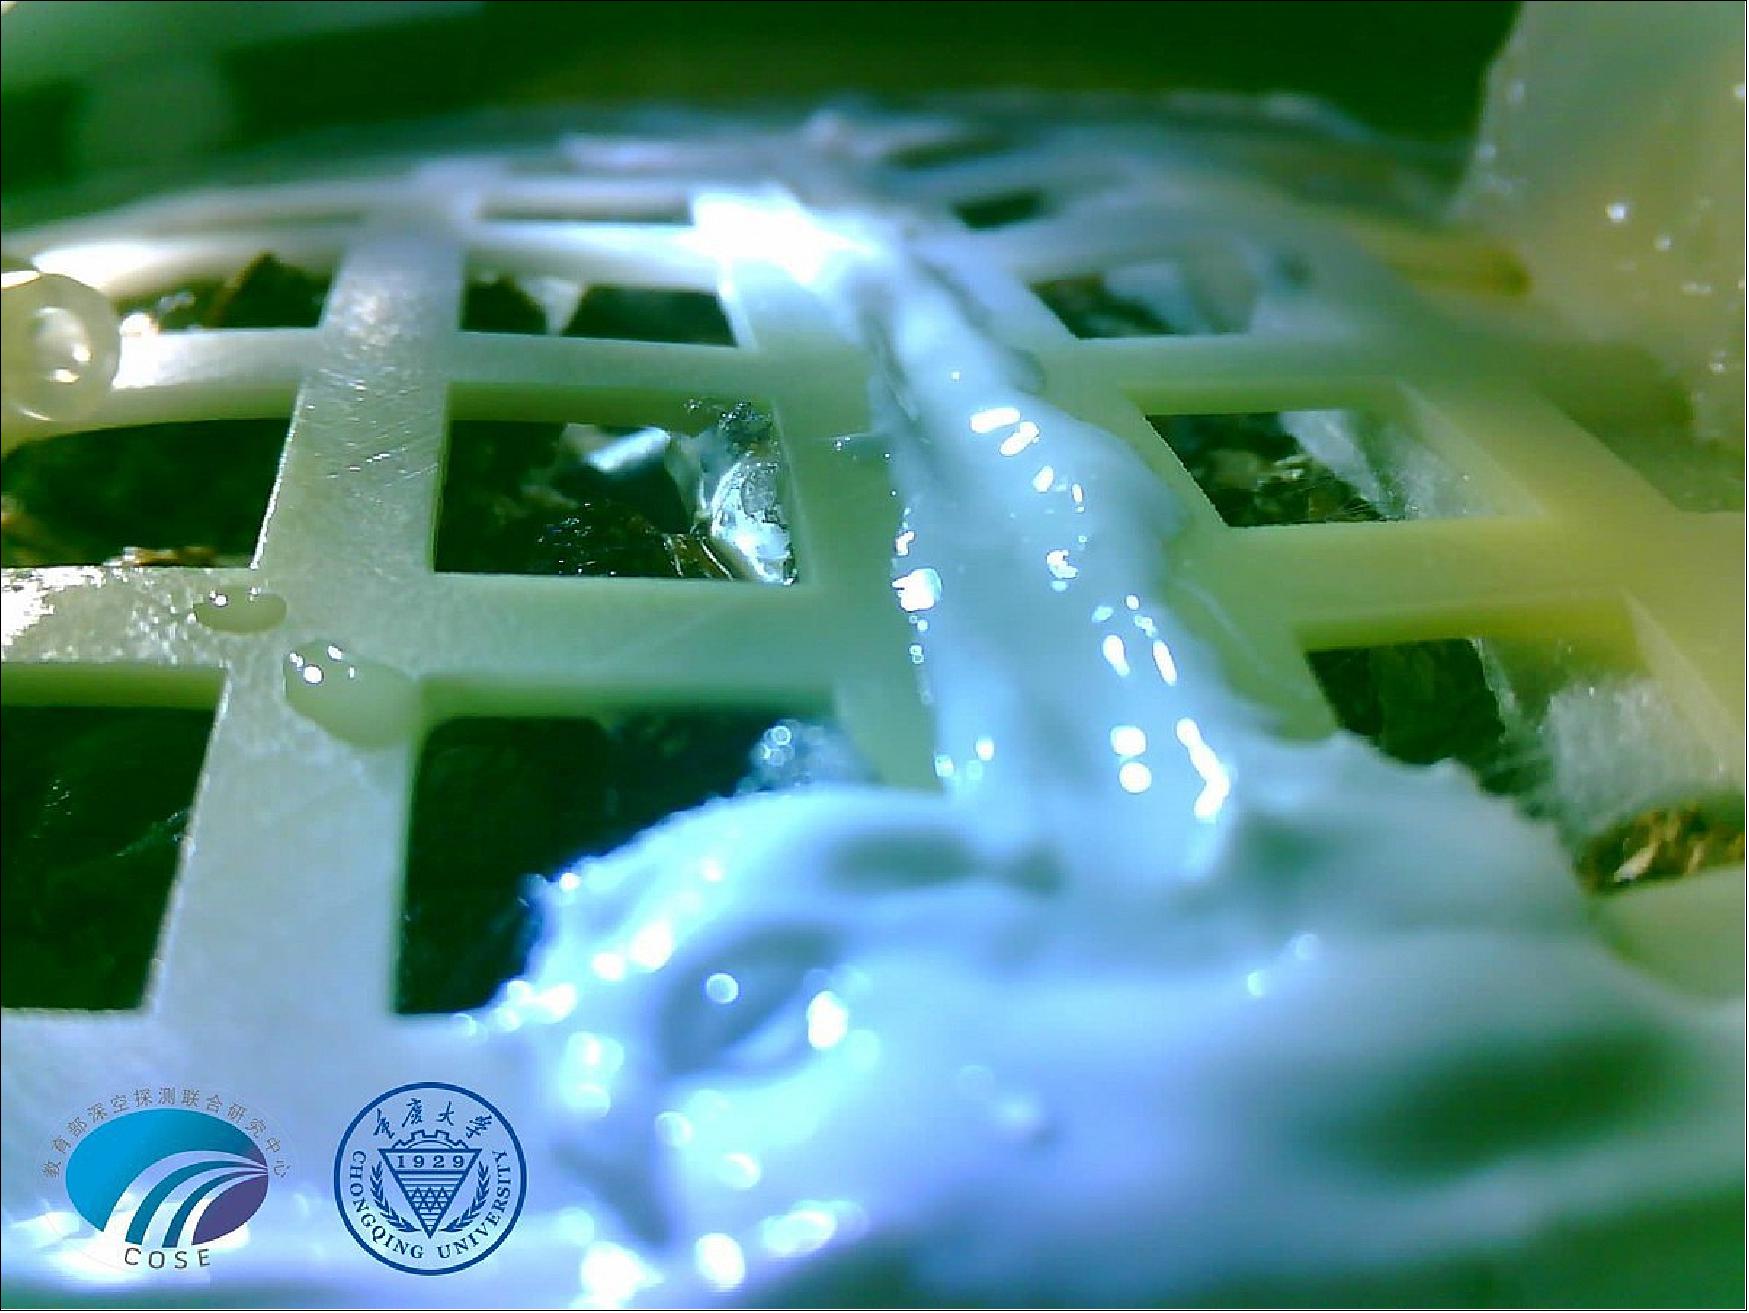 Figure 25: At 8 pm on Jan. 12, Chang'e 4 sends back the last photo of the bio test load showing that tender shoots have come out and the plants are growing well inside the sealed test can. It is the first time humans conducted a biological growth and cultivation experiment on the surface of the moon (image credit: China Daily)